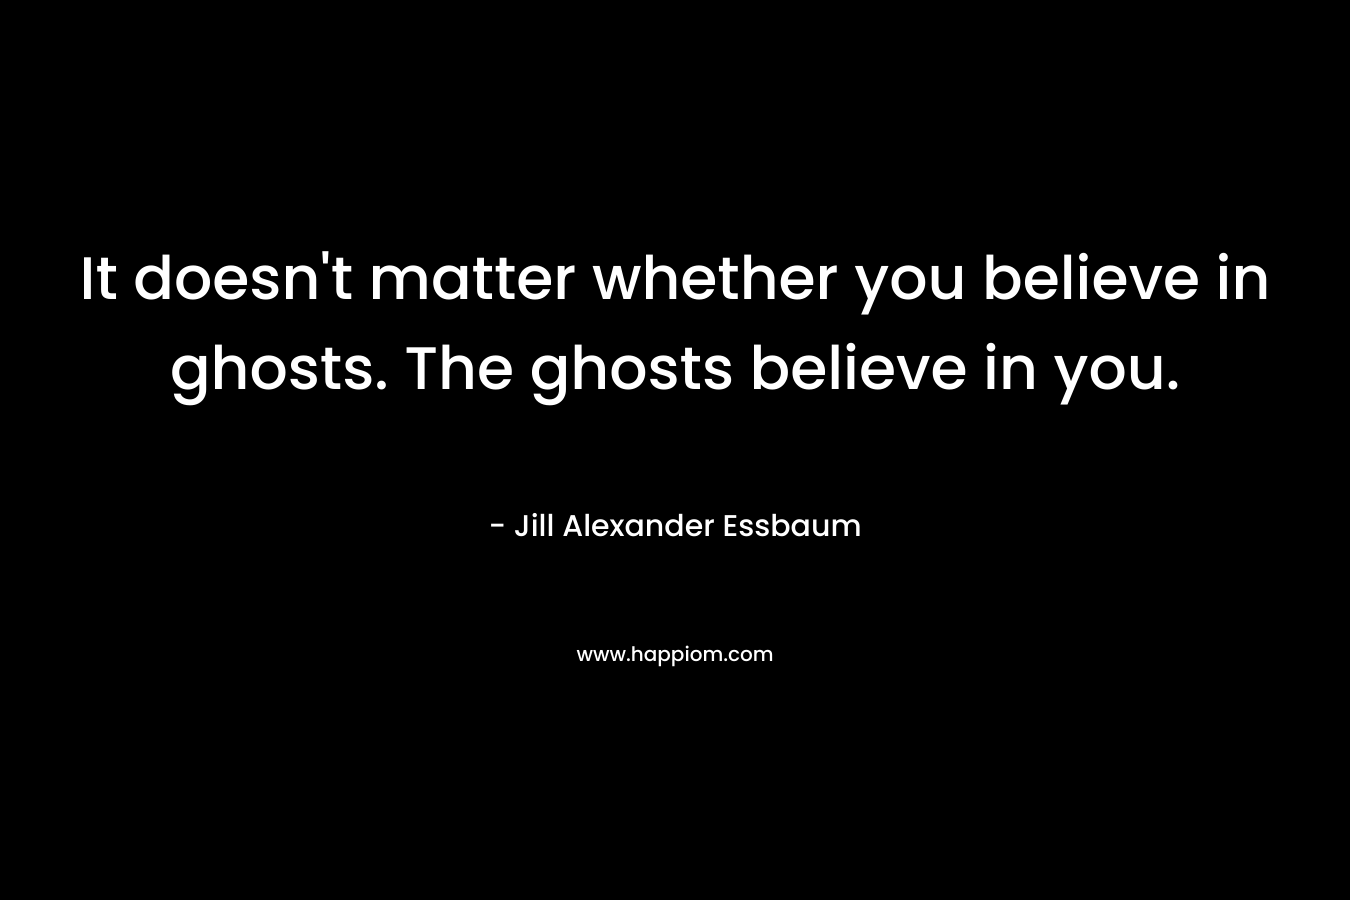 It doesn't matter whether you believe in ghosts. The ghosts believe in you.